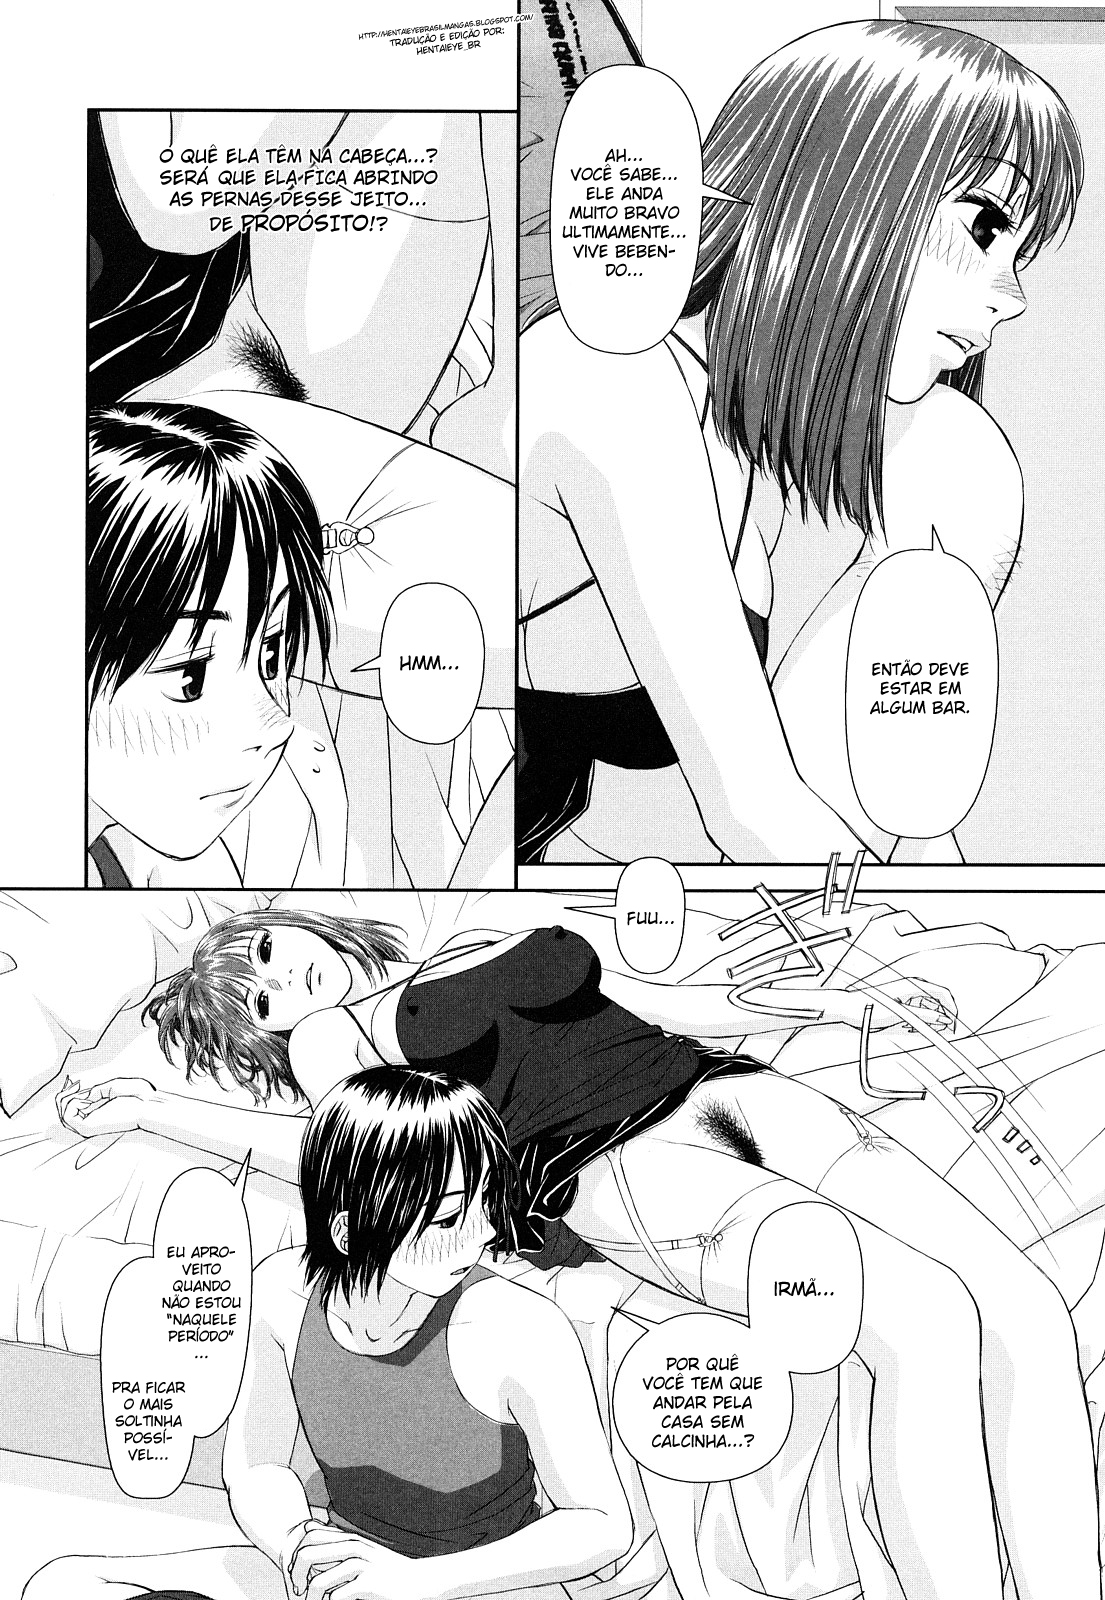 [Yui Toshiki] My Sisters | Irm&atilde;s Ch.1 [Portuguese-BR] [HentaiEye_BR] [唯登詩樹] My Sisters 章1 [ポルトガル翻訳]